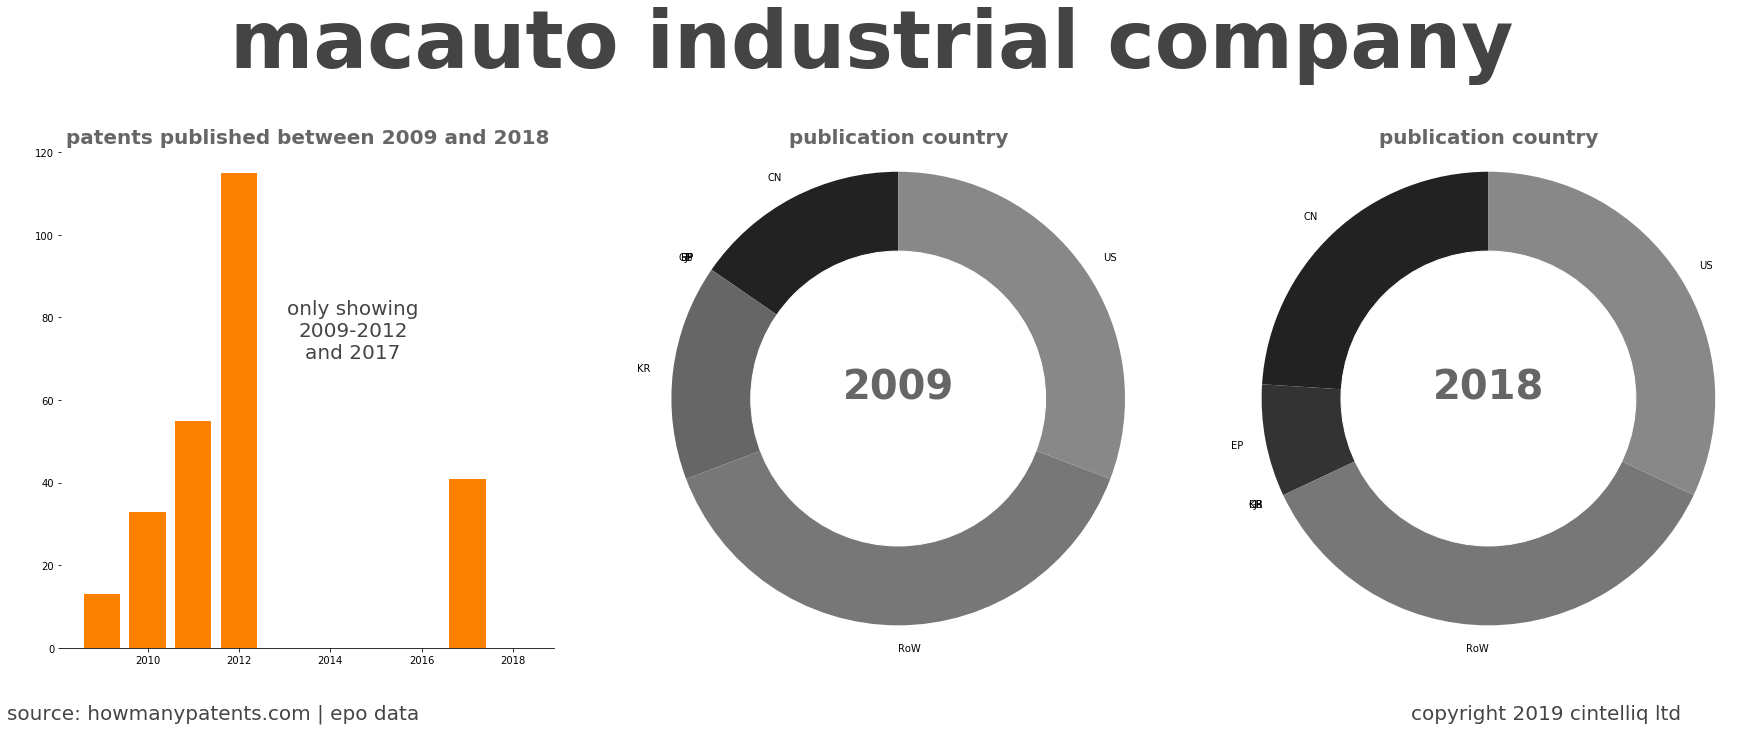 summary of patents for Macauto Industrial Company